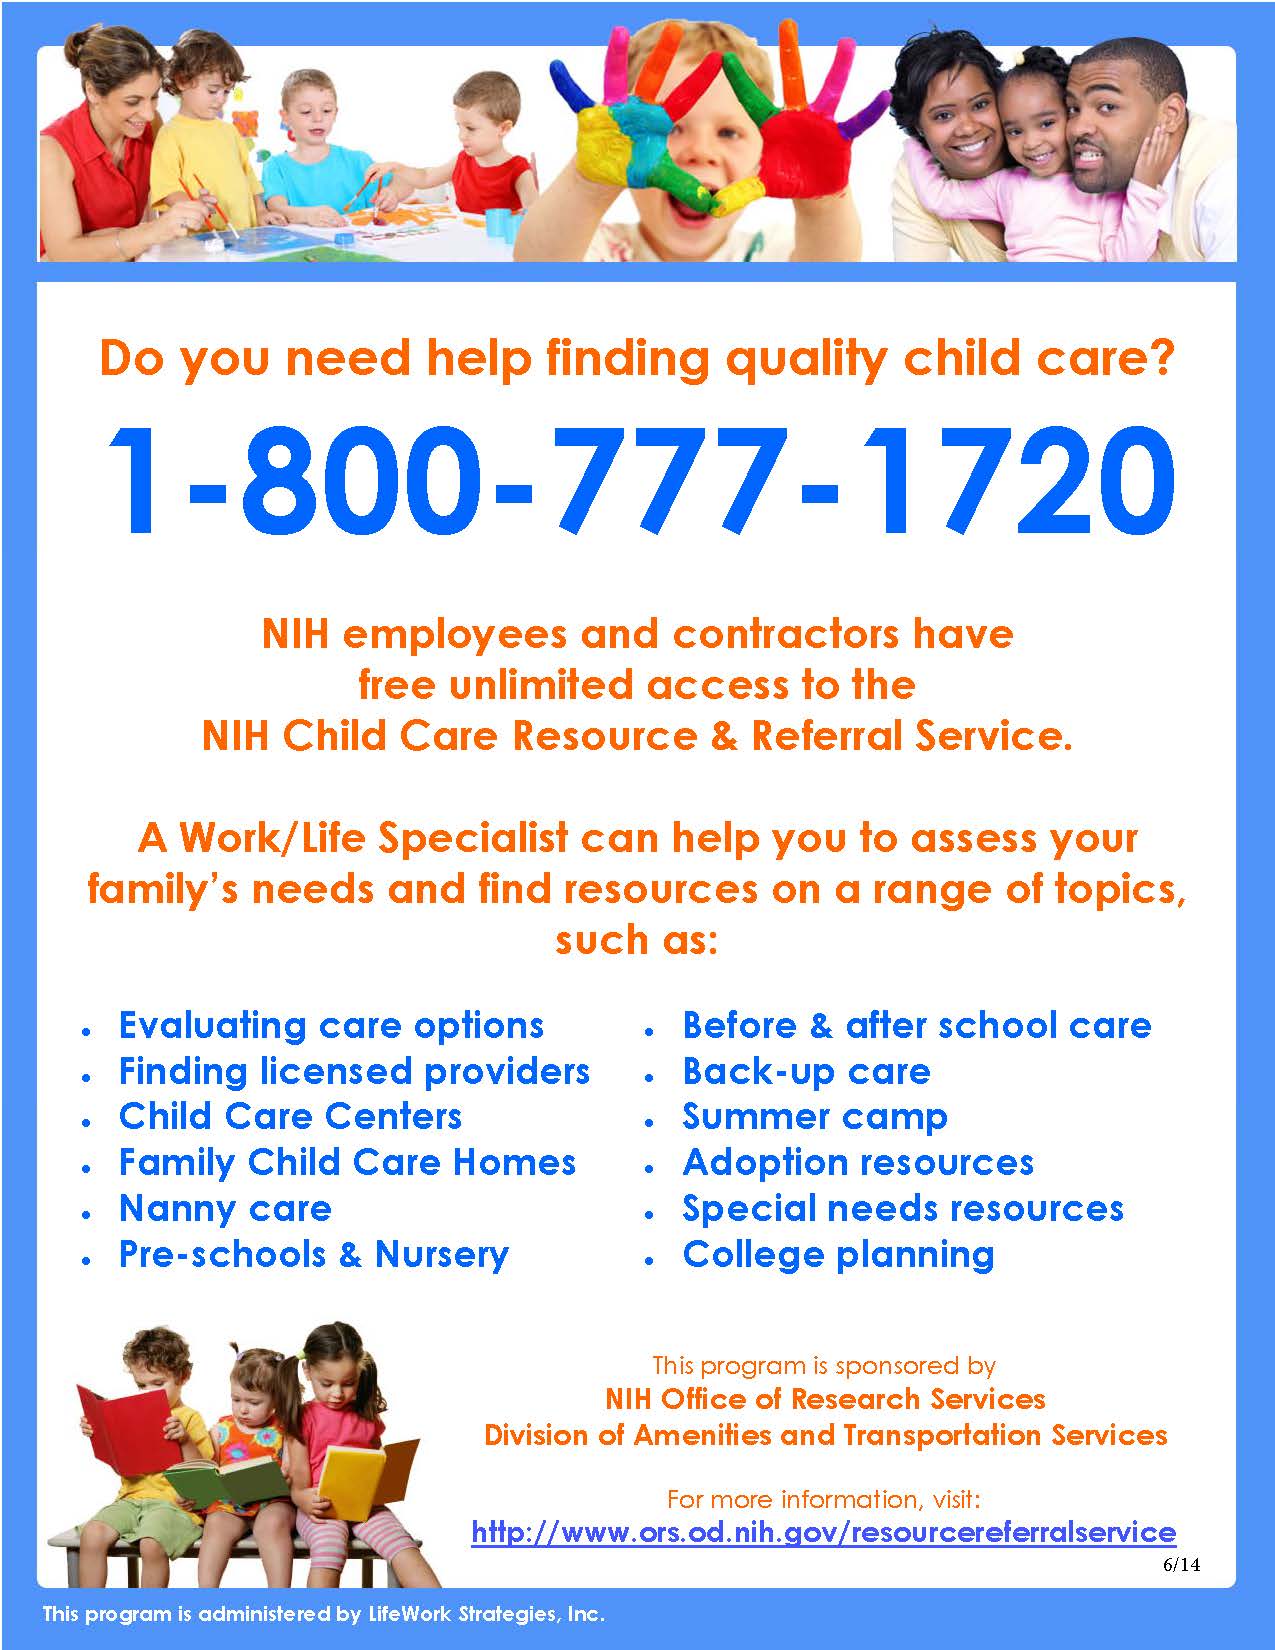 NIH Child Care Resource and Referral Services